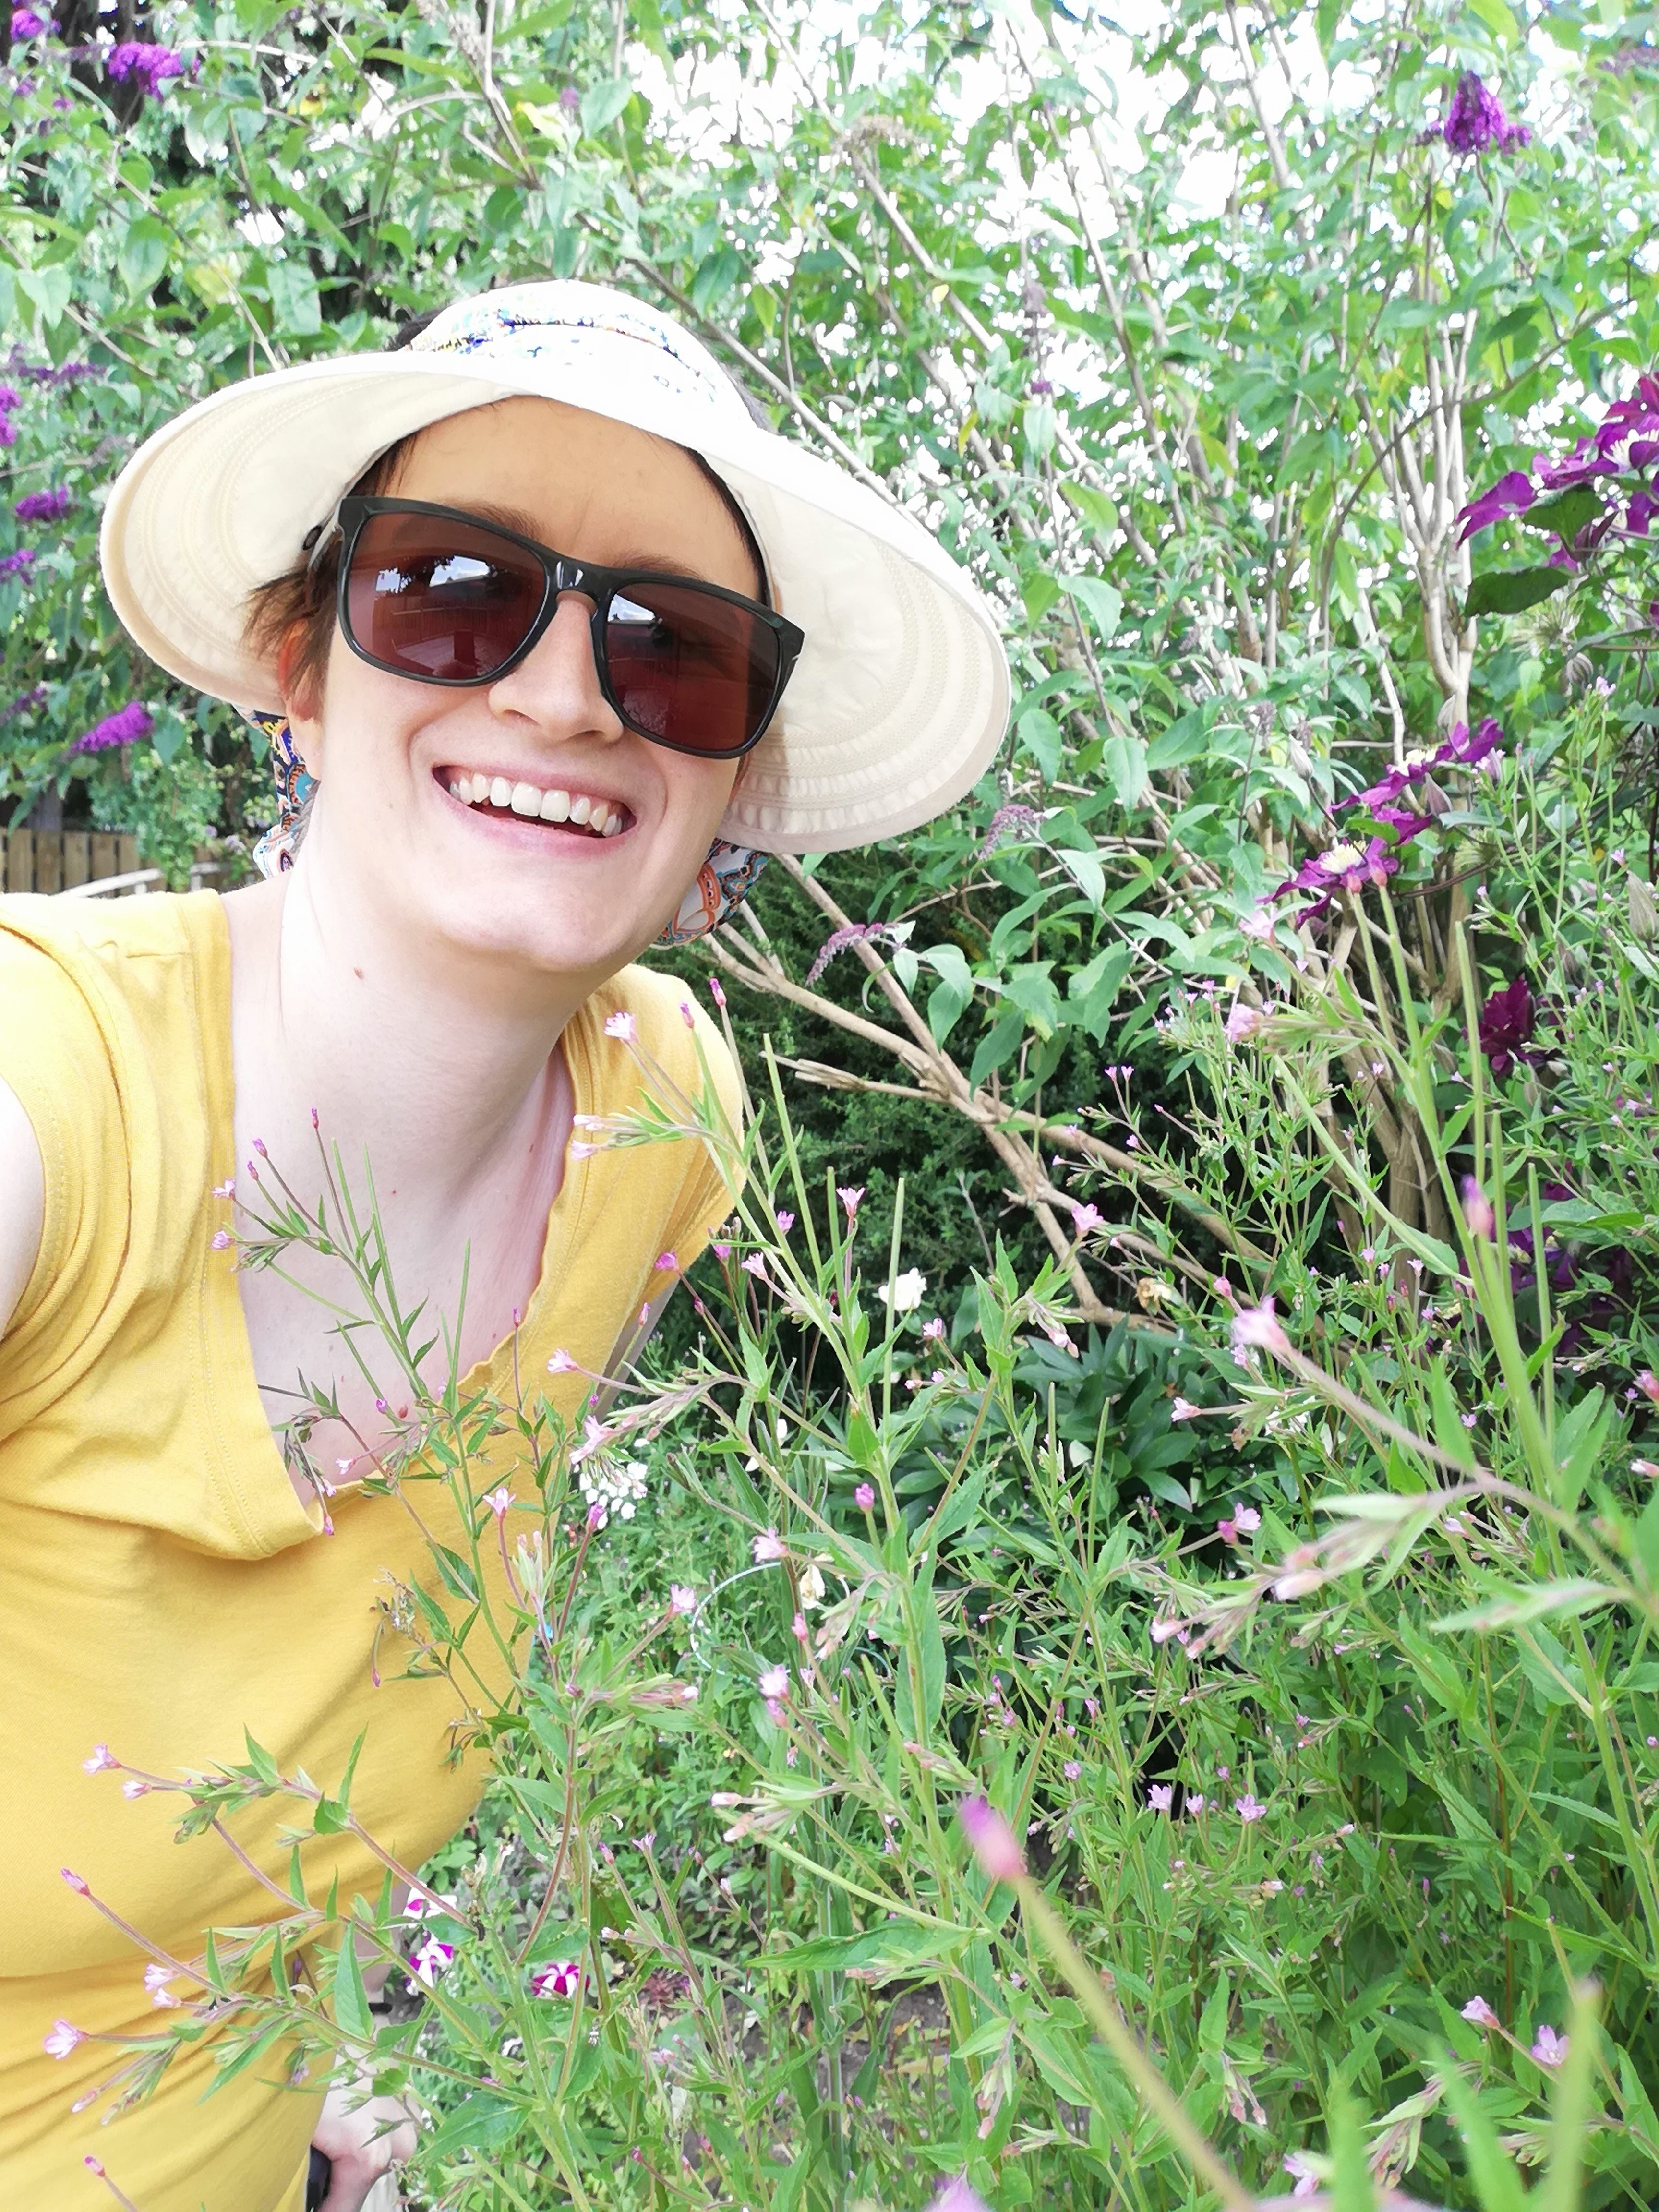 Char in the garden among the flowers. Wearing a sunhat and sunglasses.